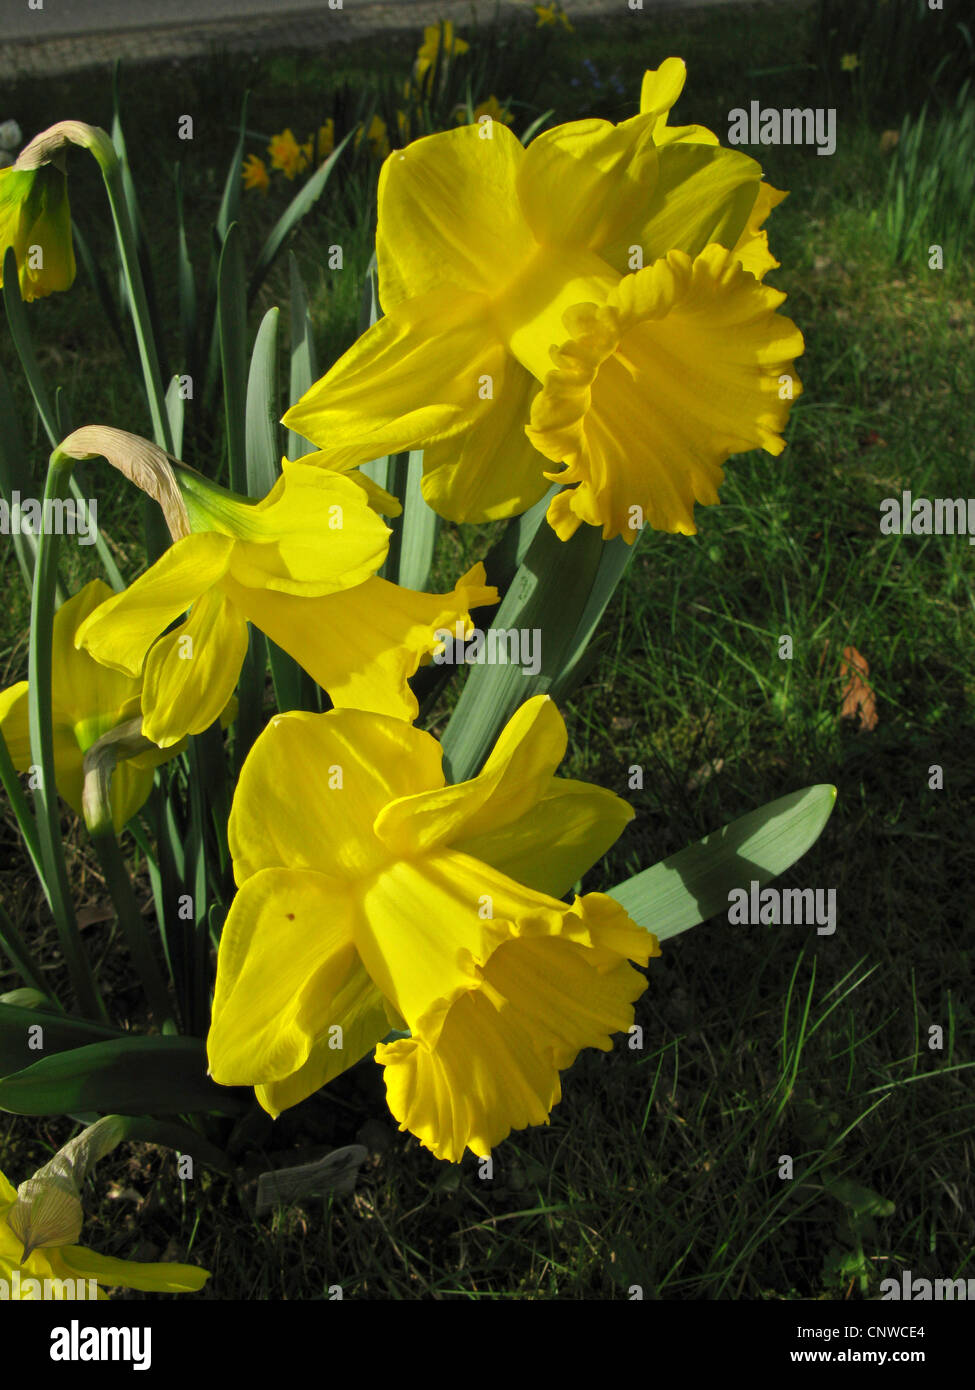 daffodil (Narcissus 'Gold Medal', Narcissus Gold Medal), trumpet daffodil, cultivar Gold Medal Stock Photo